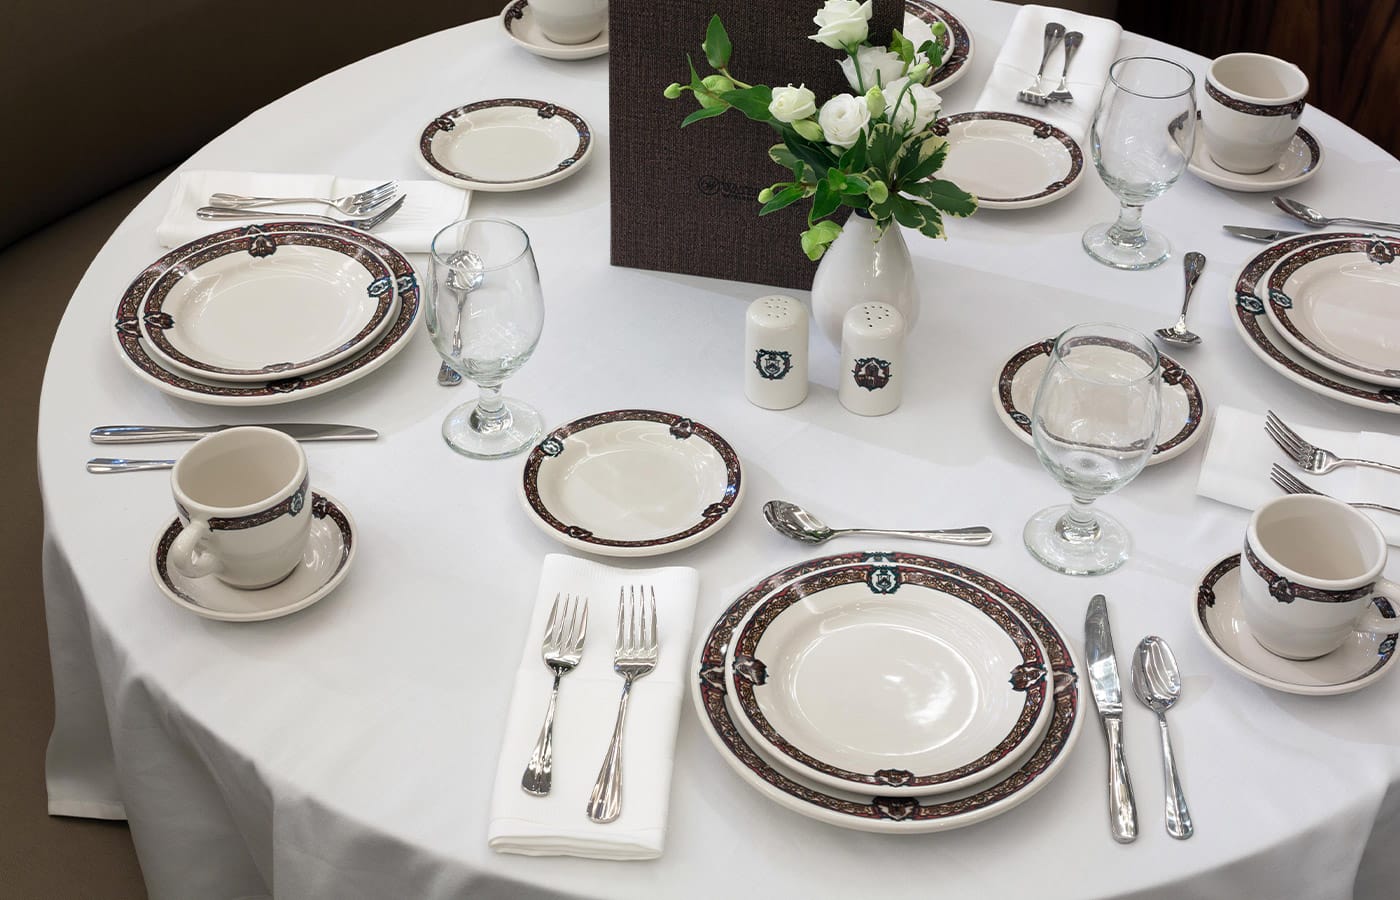 A table set for five with white linens and fine china and accompanying cutlery around a white floral centerpiece.